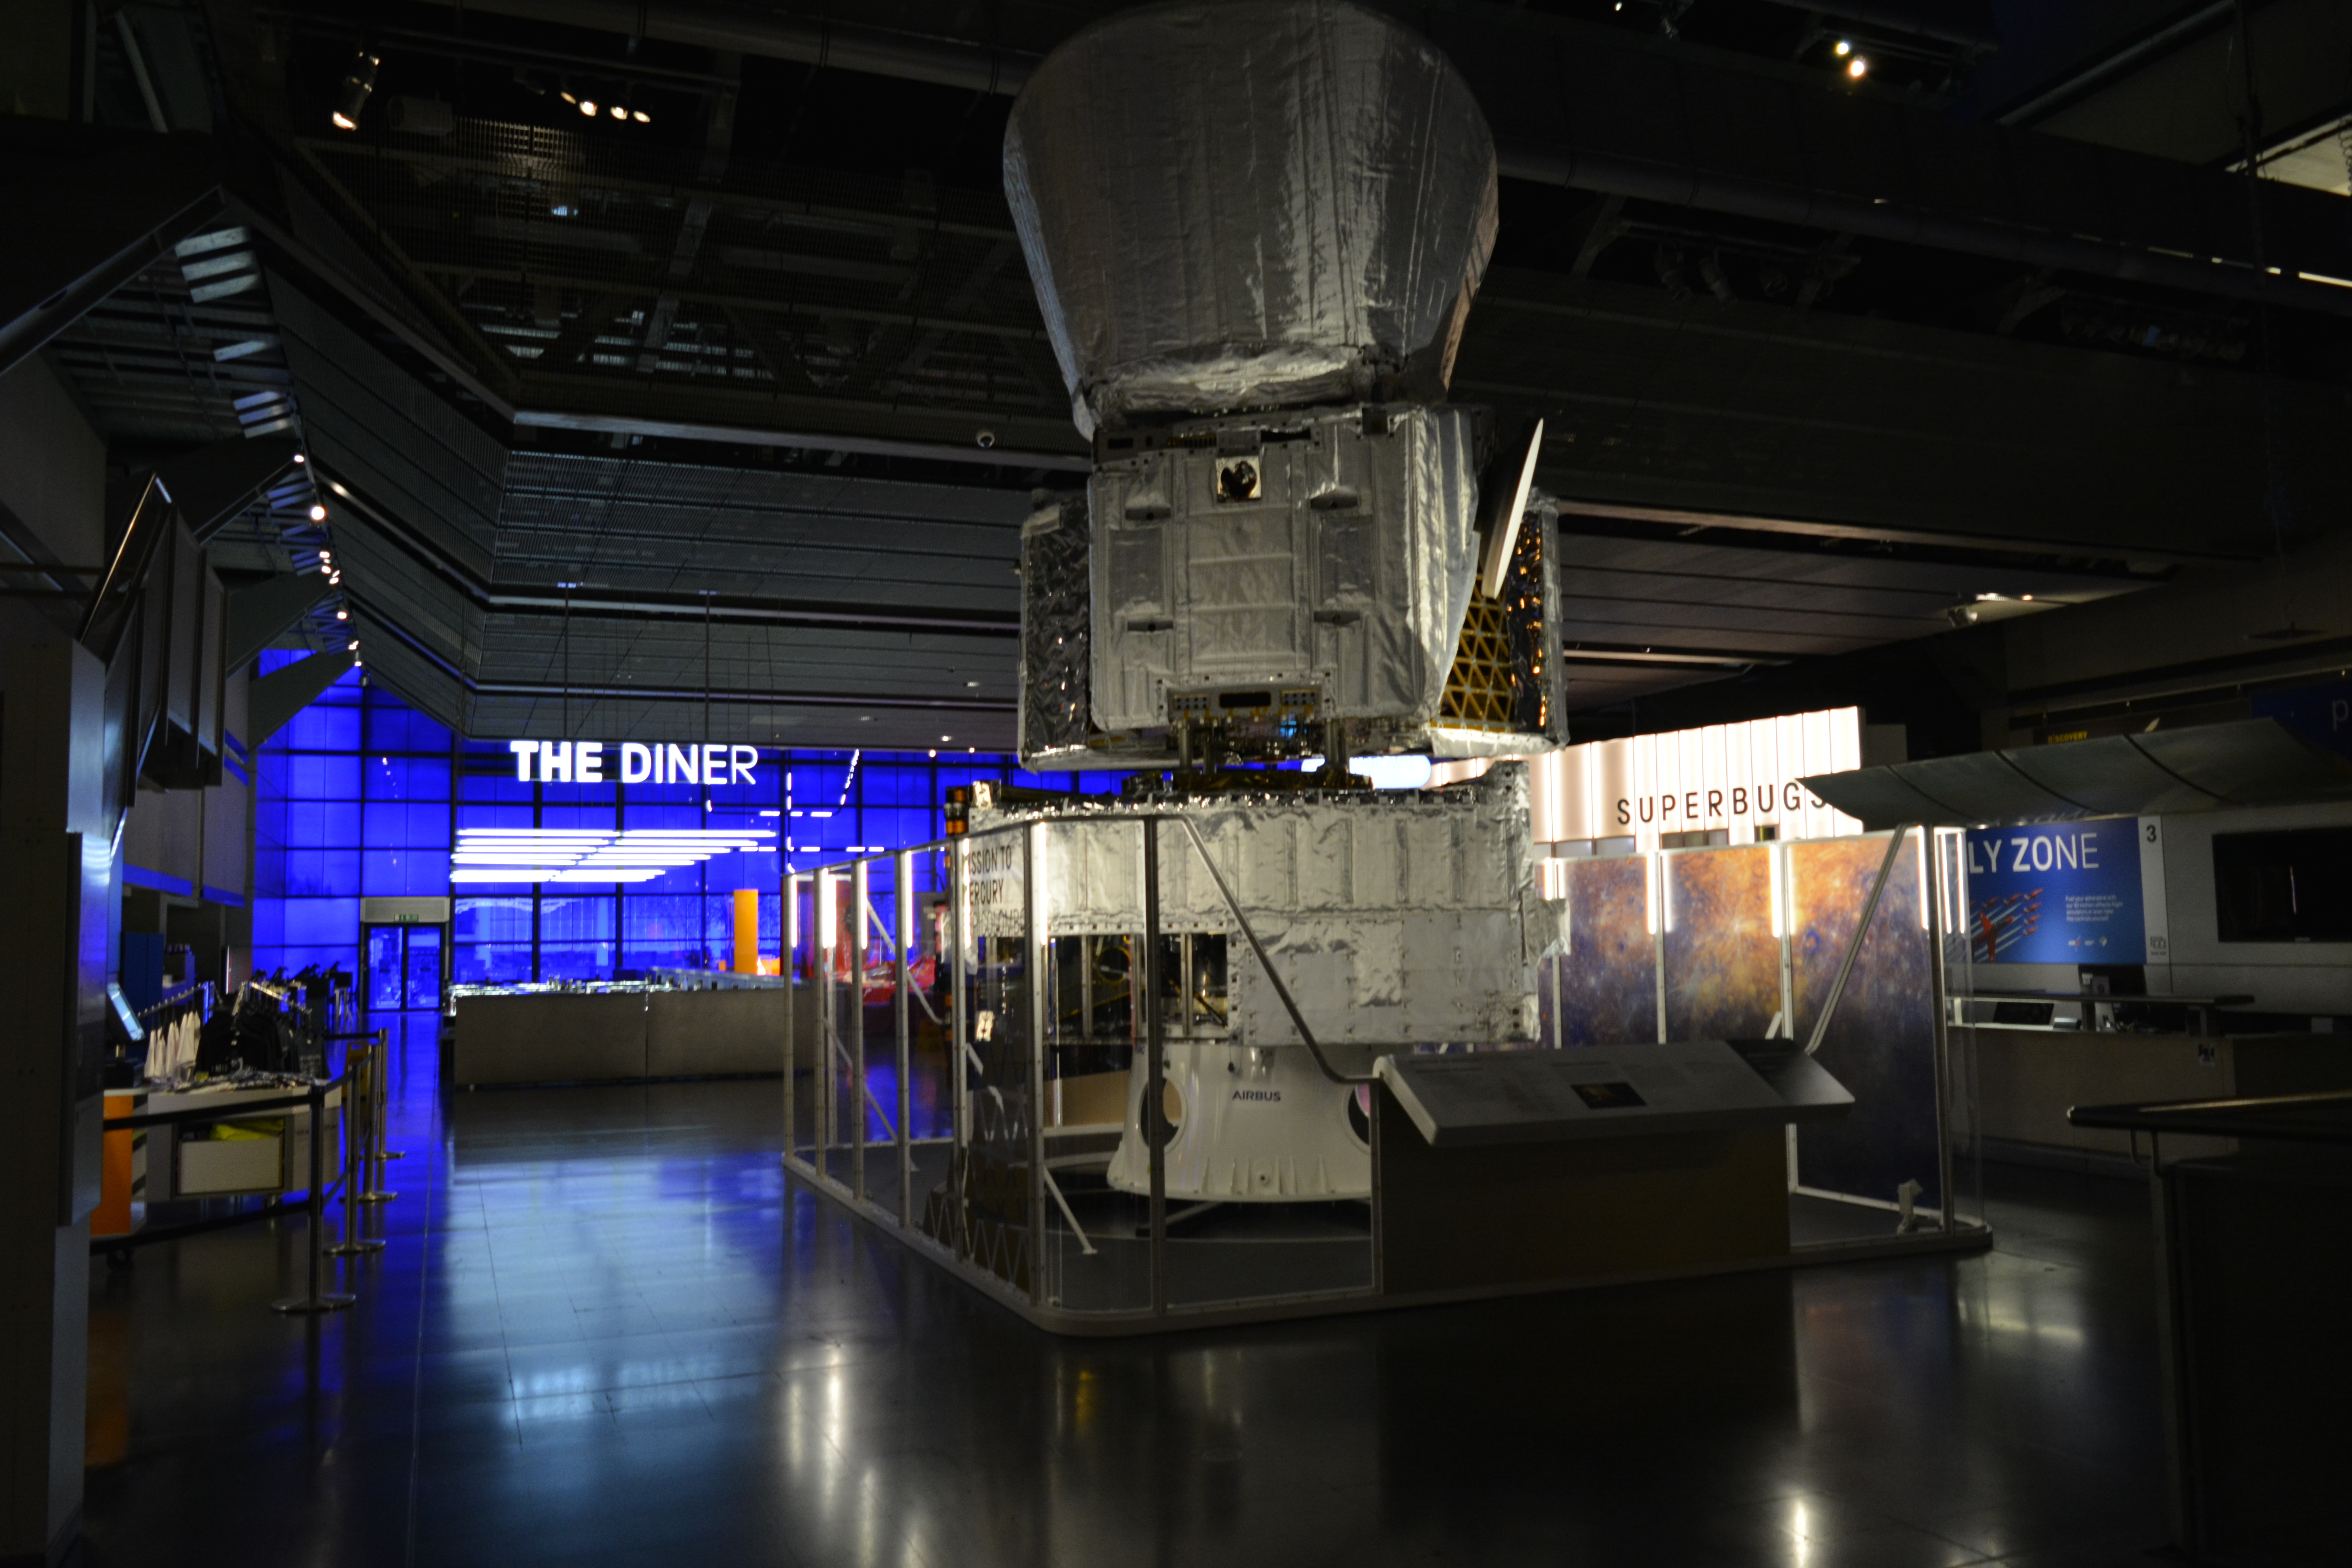 The Diner cafe, BepiColombo prototype and Superbugs exhibition on display in the Tomorrow's World gallery.